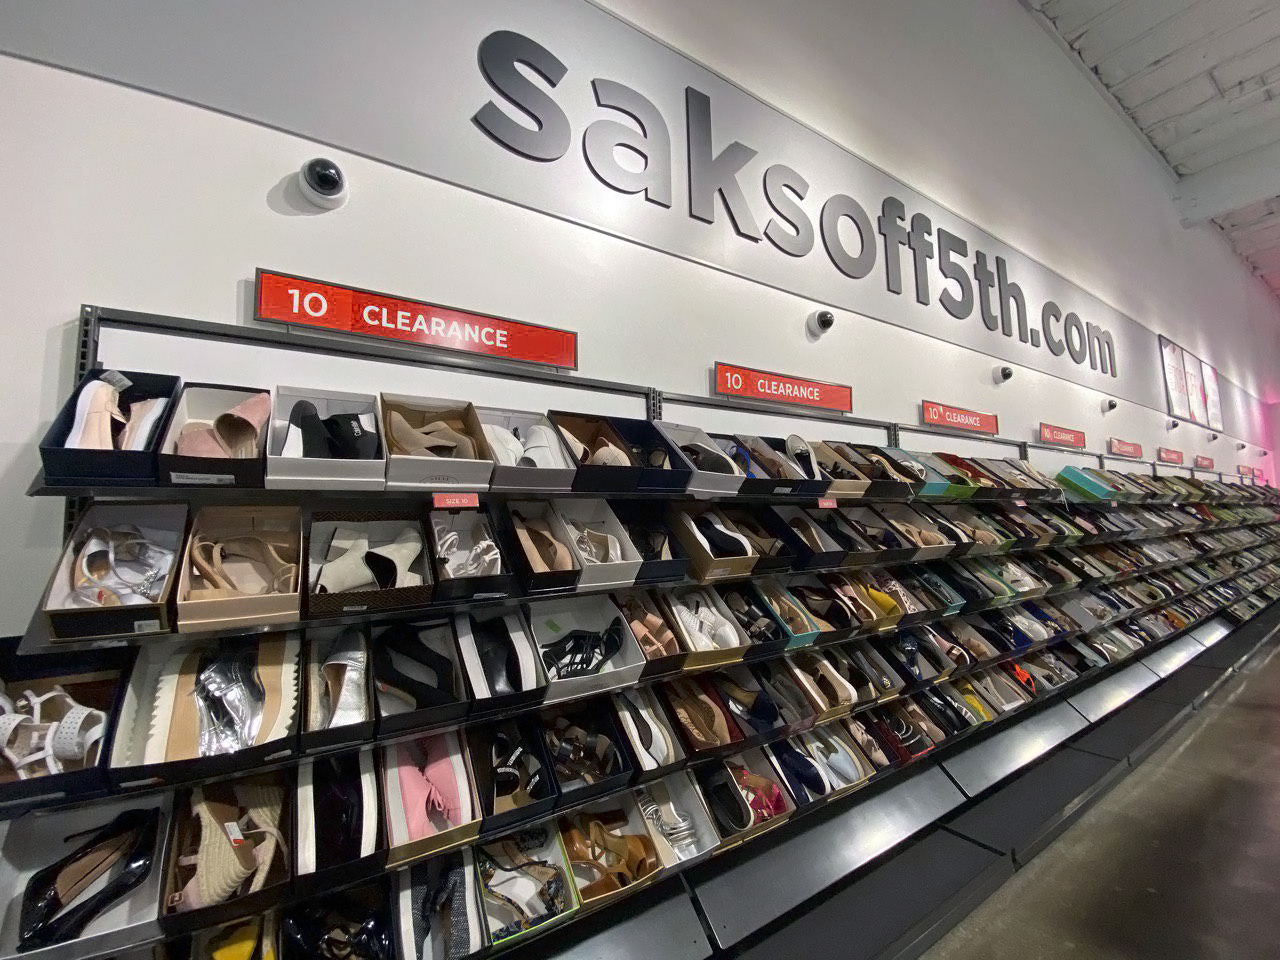 Saks Off 5th Clearance Shoes